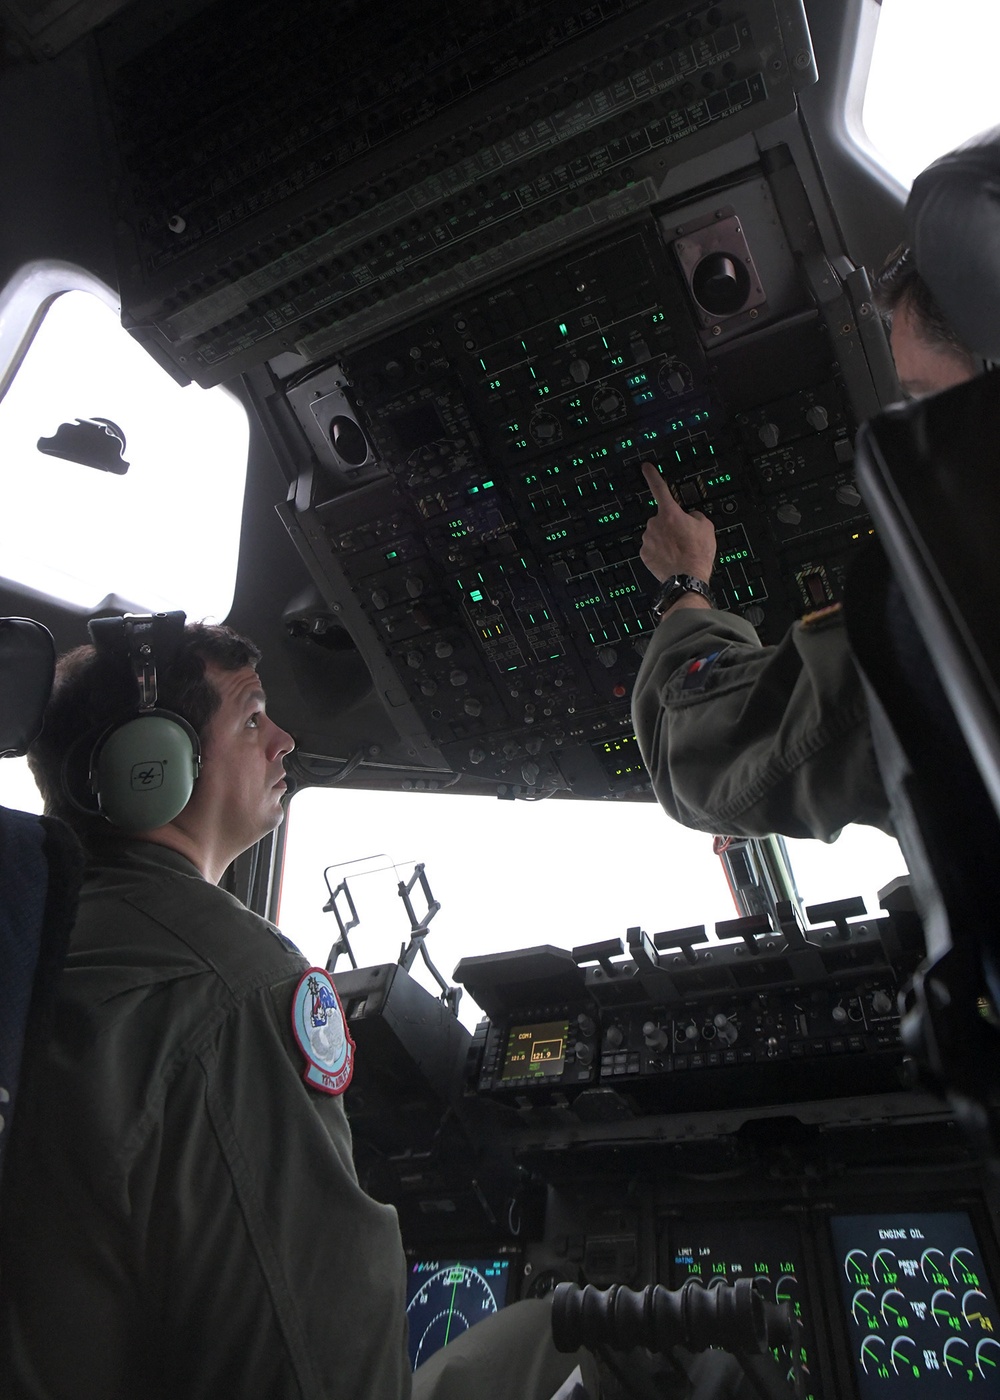 The 105th Airlift Wing and the 158th Fighter Wing Conduct Air Guard Wing-Level Exercise